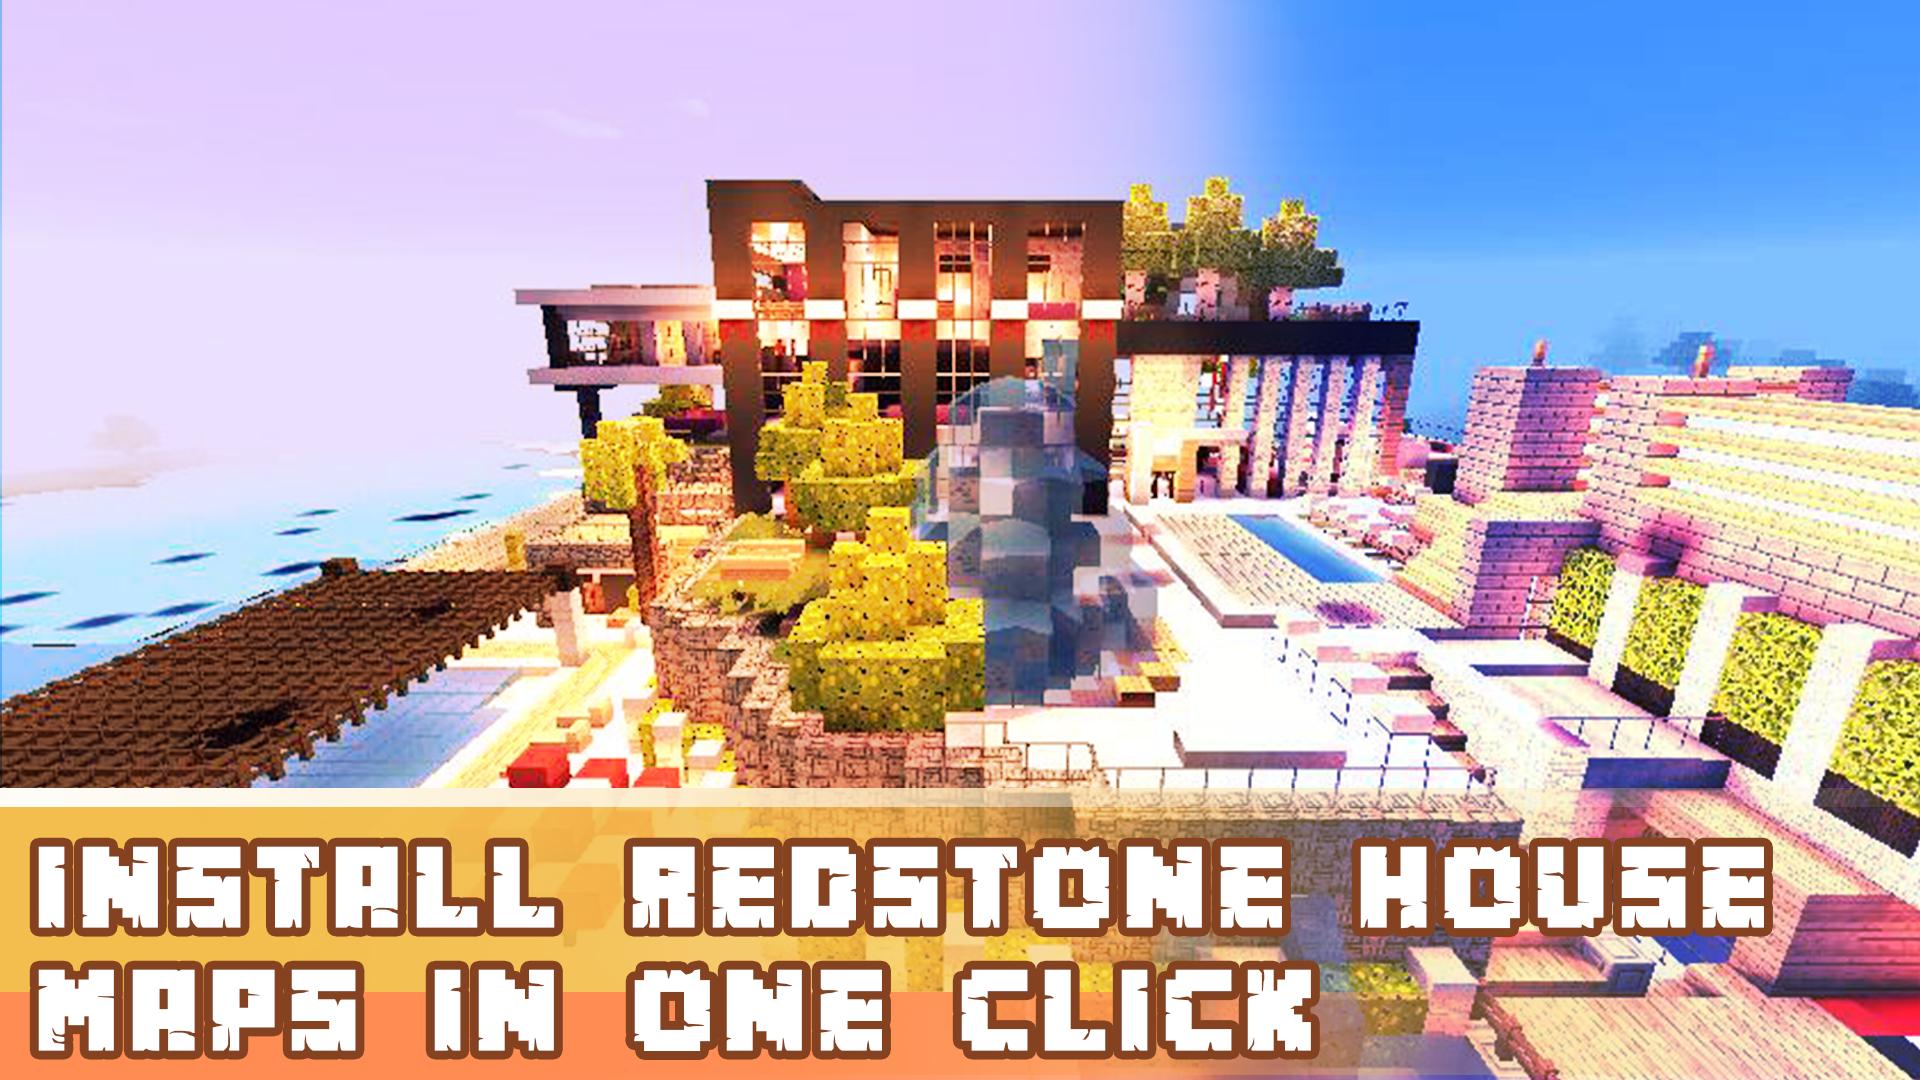 House maps for mcpe – Apps no Google Play